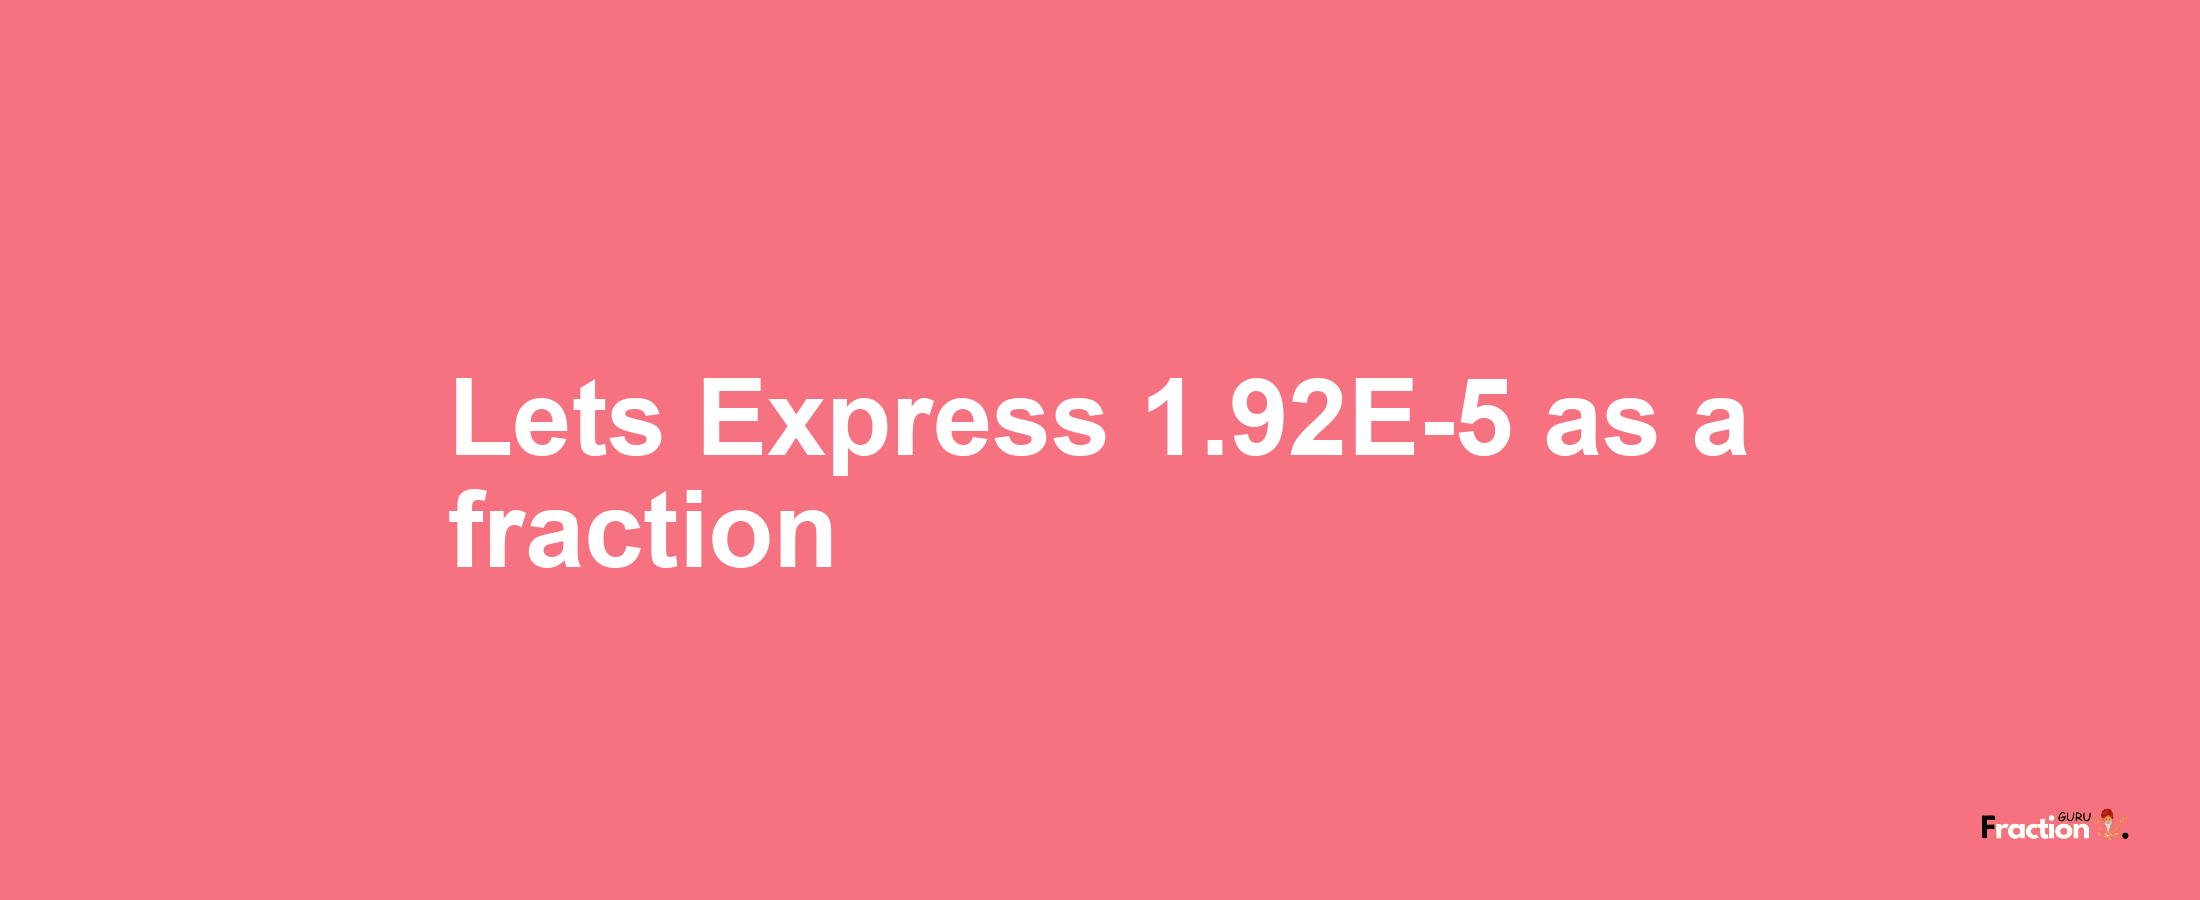 Lets Express 1.92E-5 as afraction